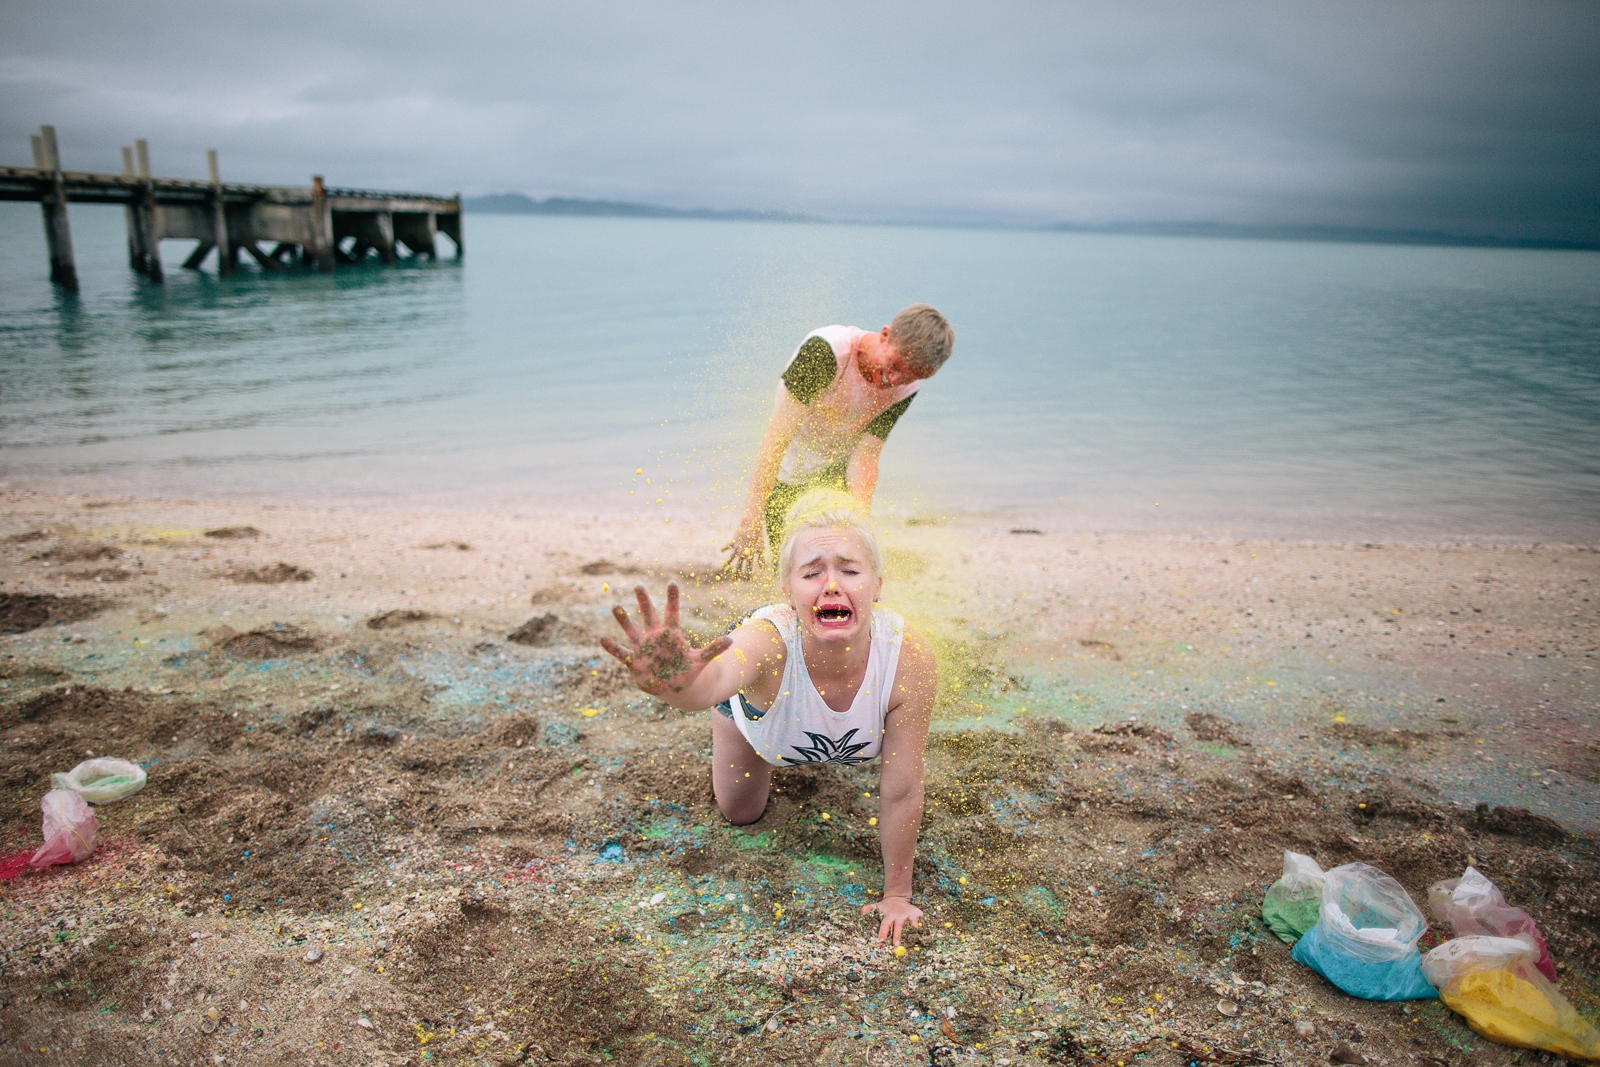 Adam and Darcie // Holi Powder Engagement Shoot by Patty Lagera Photography